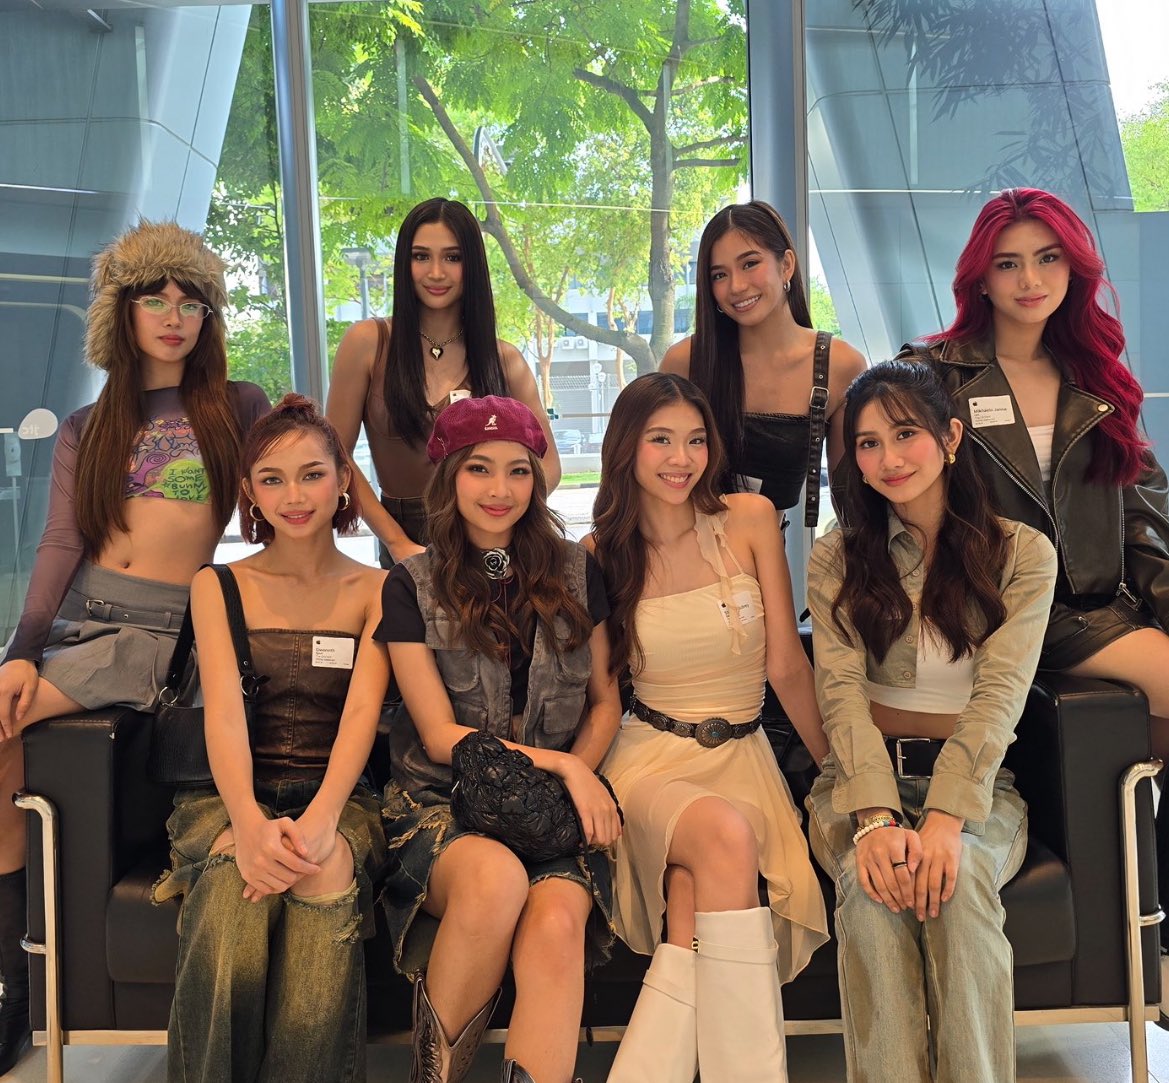 THEIR OUTFITS??!!! 🤯🤯🤯  #bini